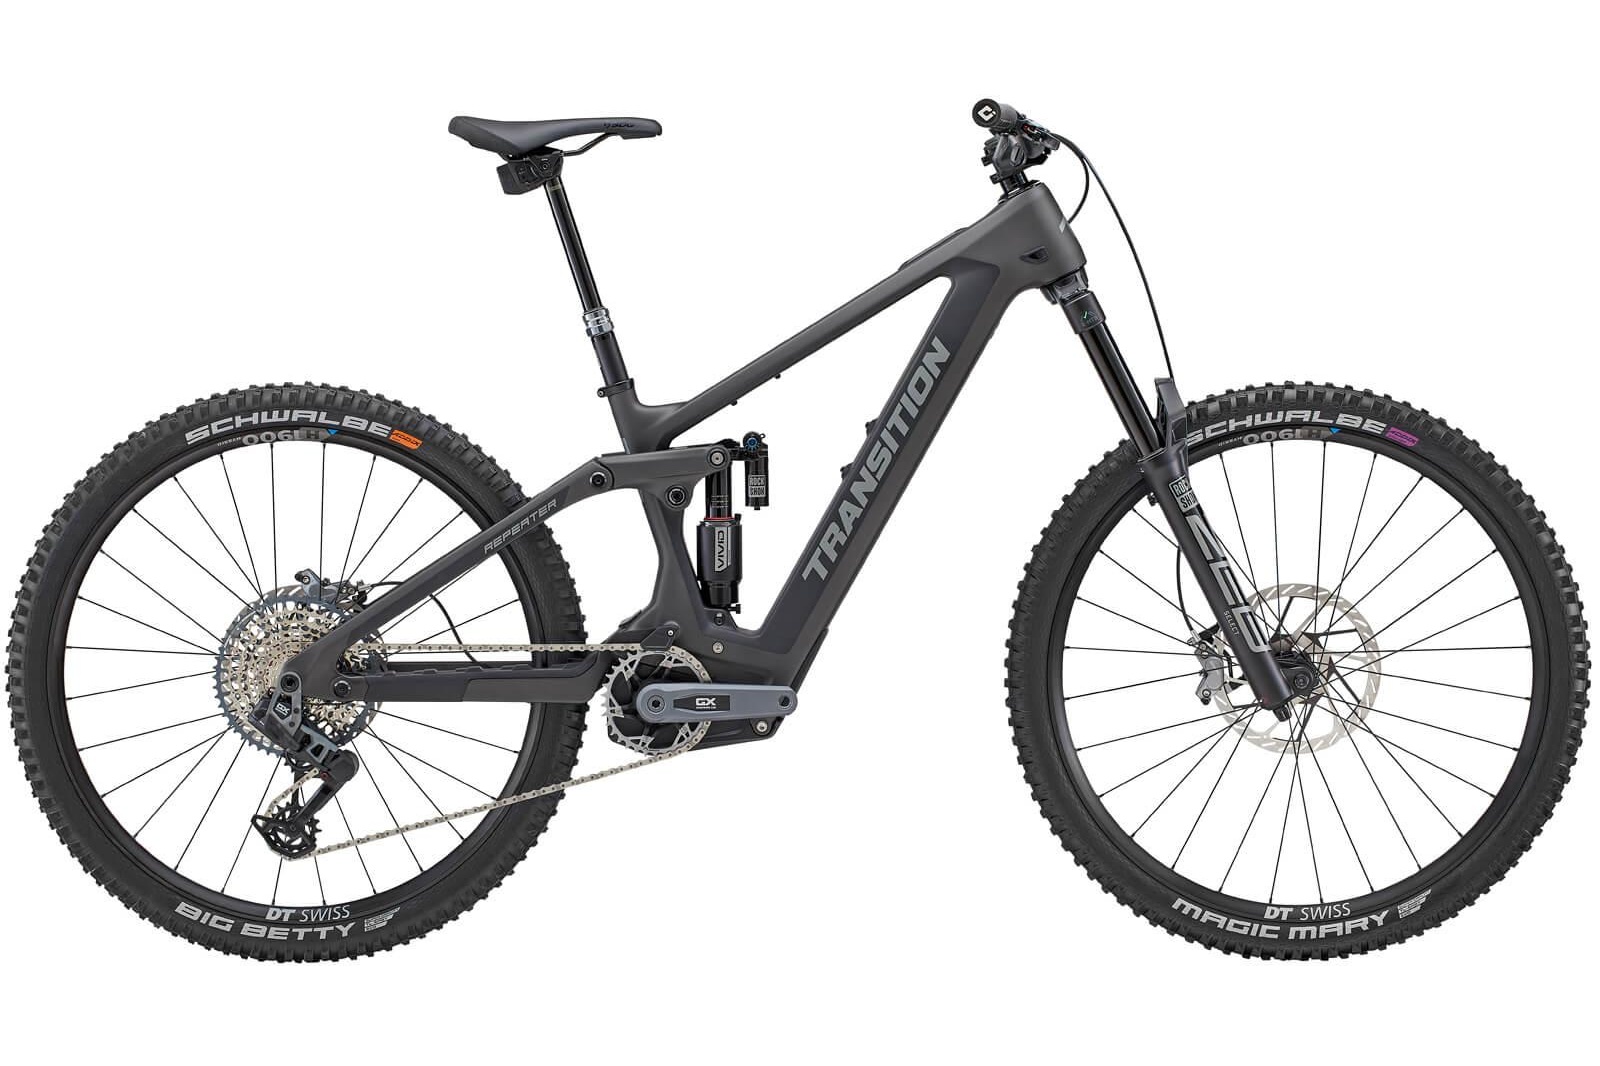 Transition Repeater Carbon GX axs Review